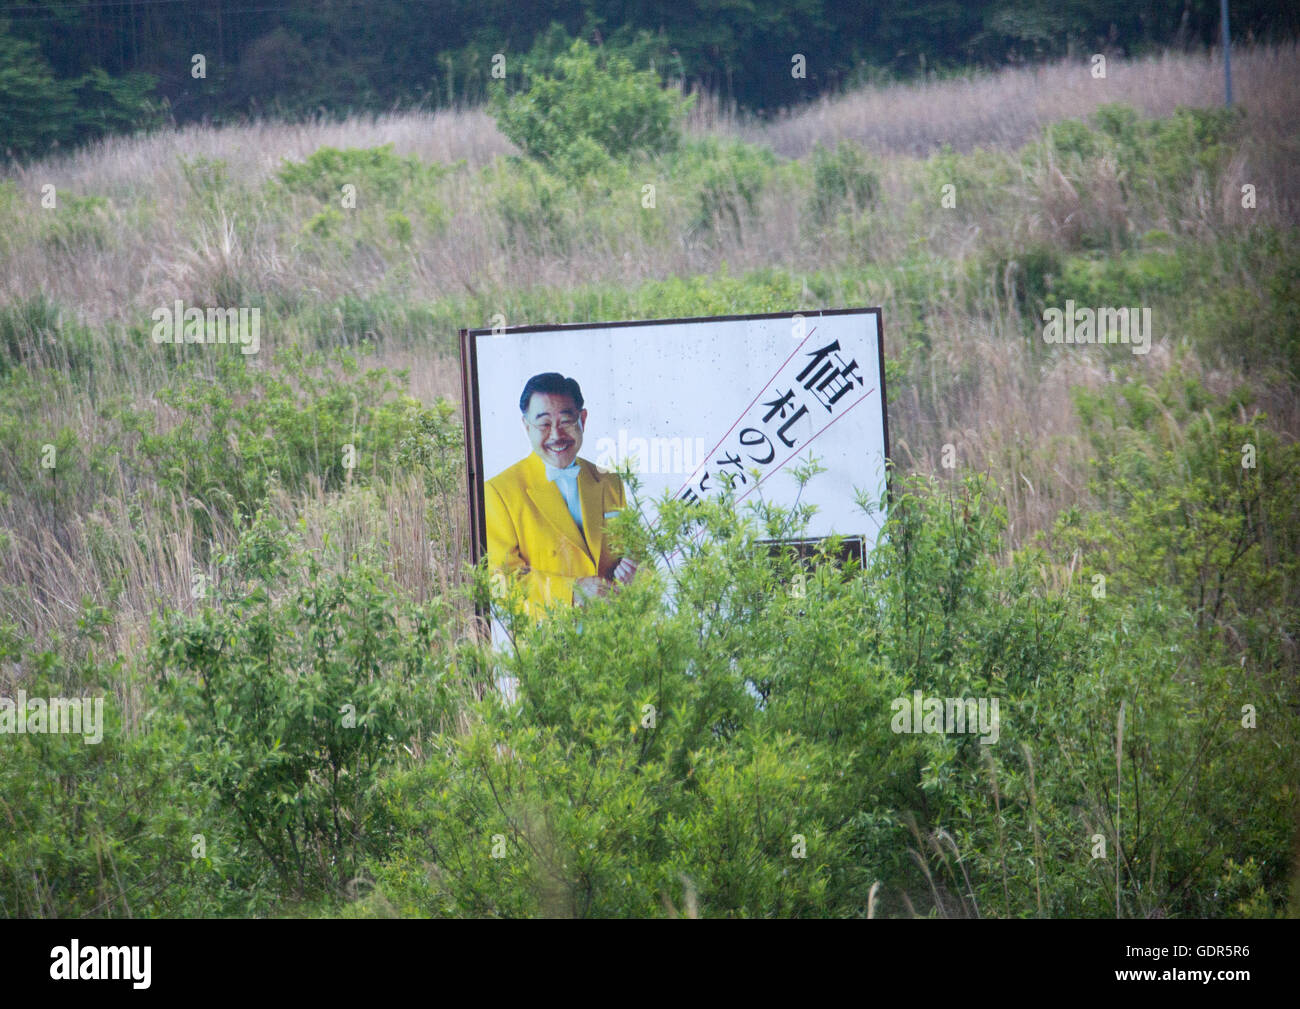 Advertisement billboard in the difficult-to-return zone after the daiichi nuclear power plant irradiation, Fukushima prefecture, Tomioka, Japan Stock Photo